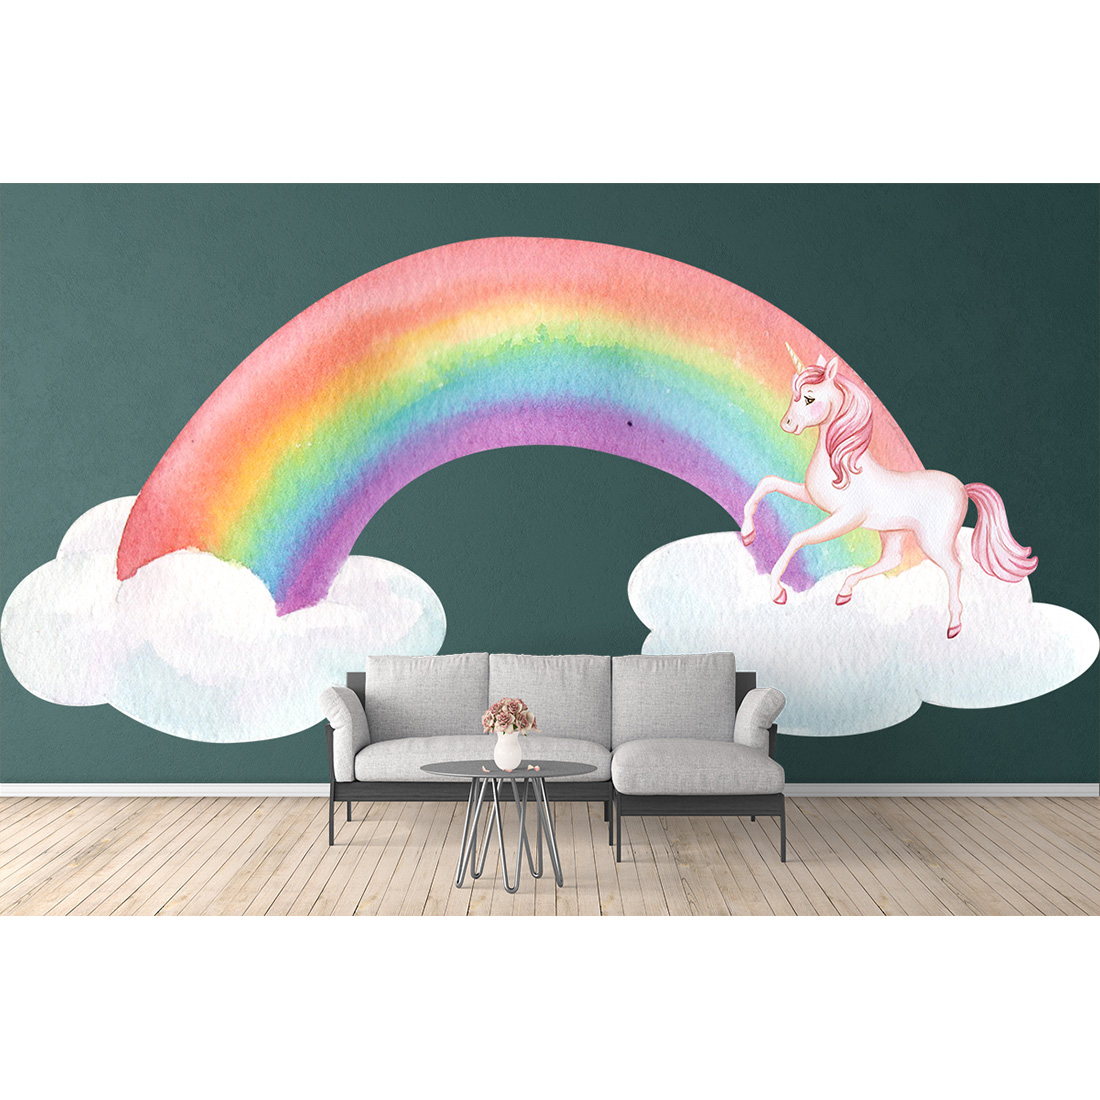 Charming picture on the wall with unicorn and rainbow